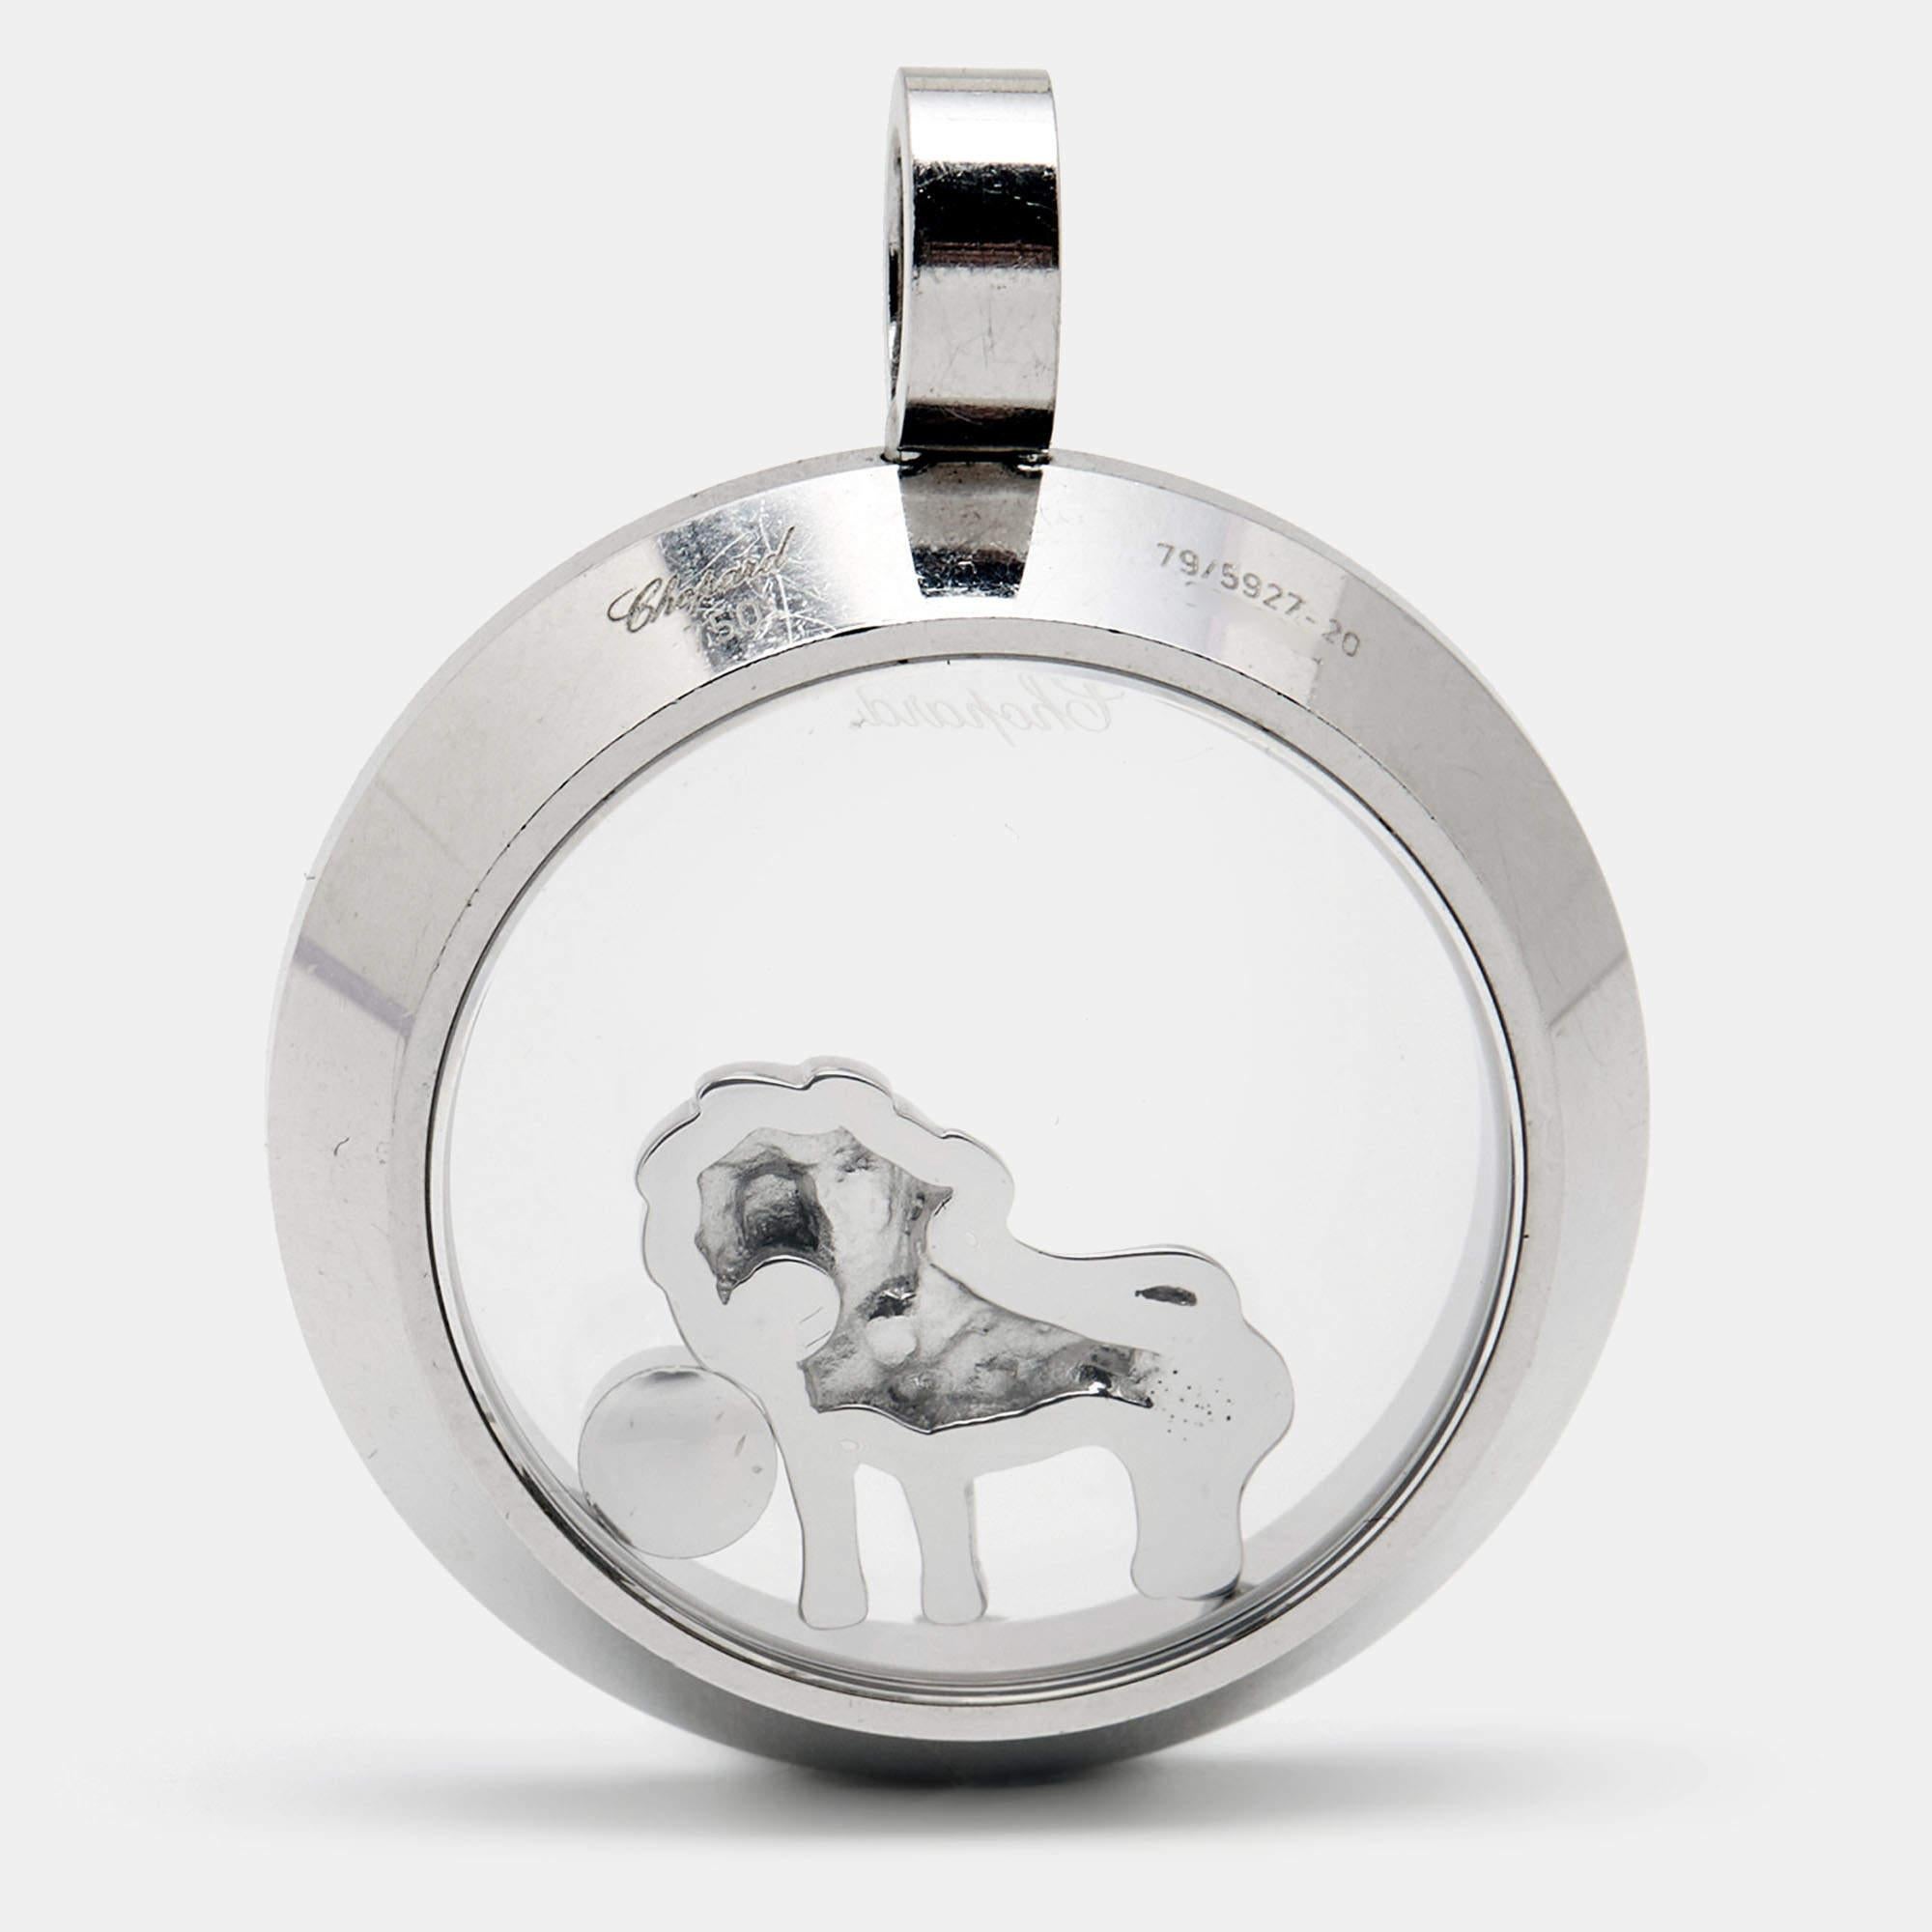 Chopard's Happy collection was inspired by drops of water and the free movement of the diamonds is a hallmark of the collection. This pendant is made from 18k white gold and features a floating lion motif within.

